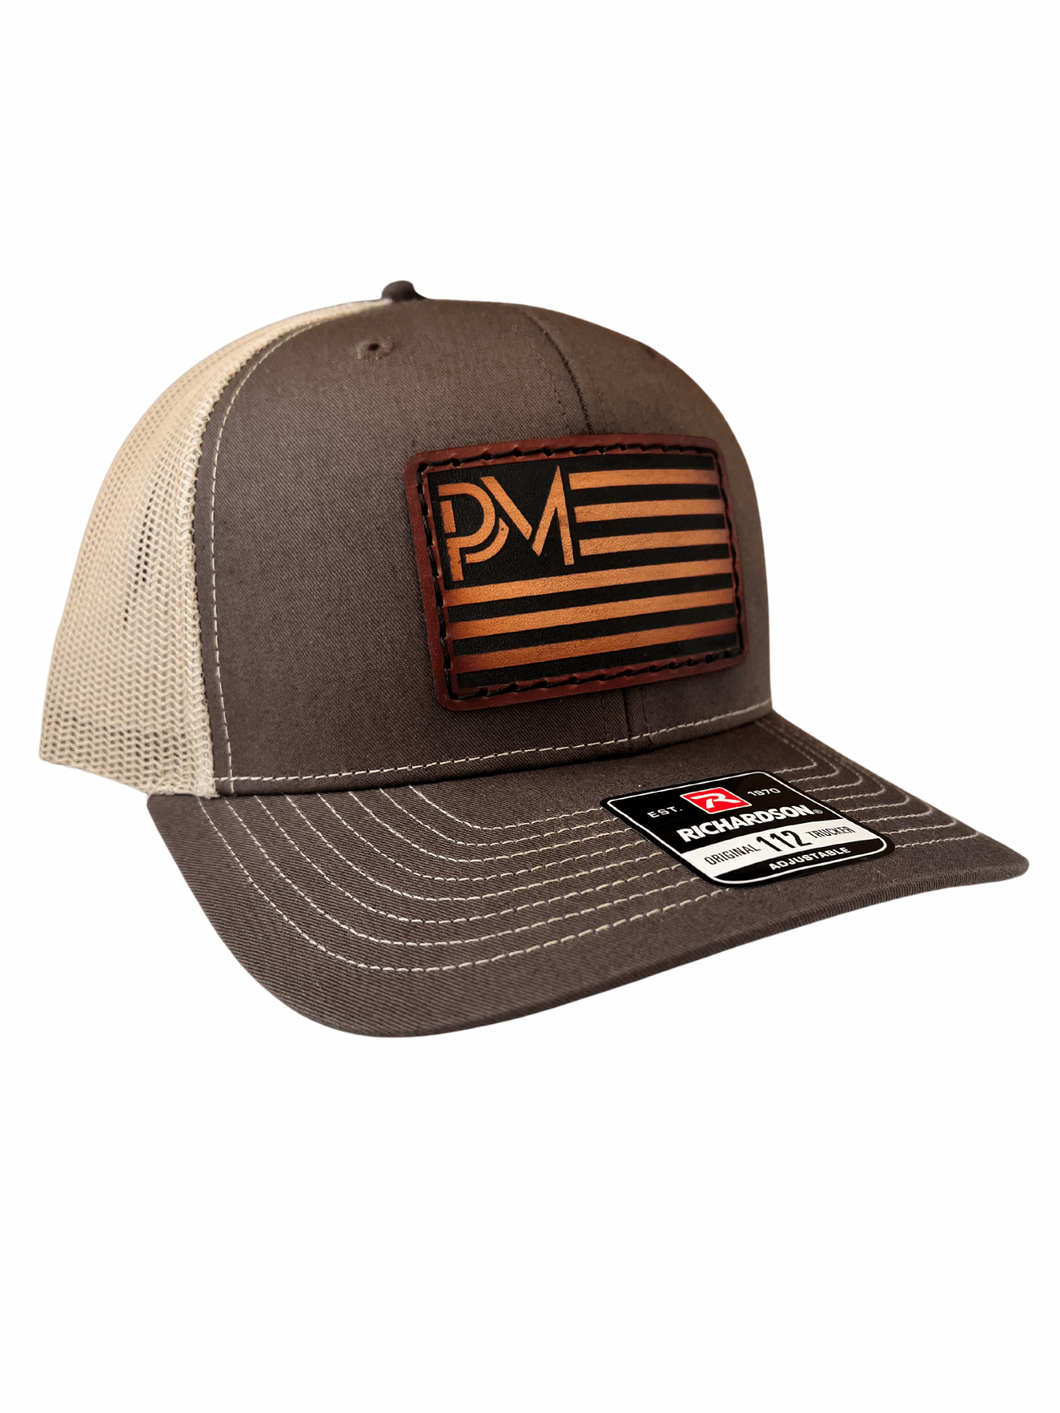 Phaser USA Leather Patch Hat TAN